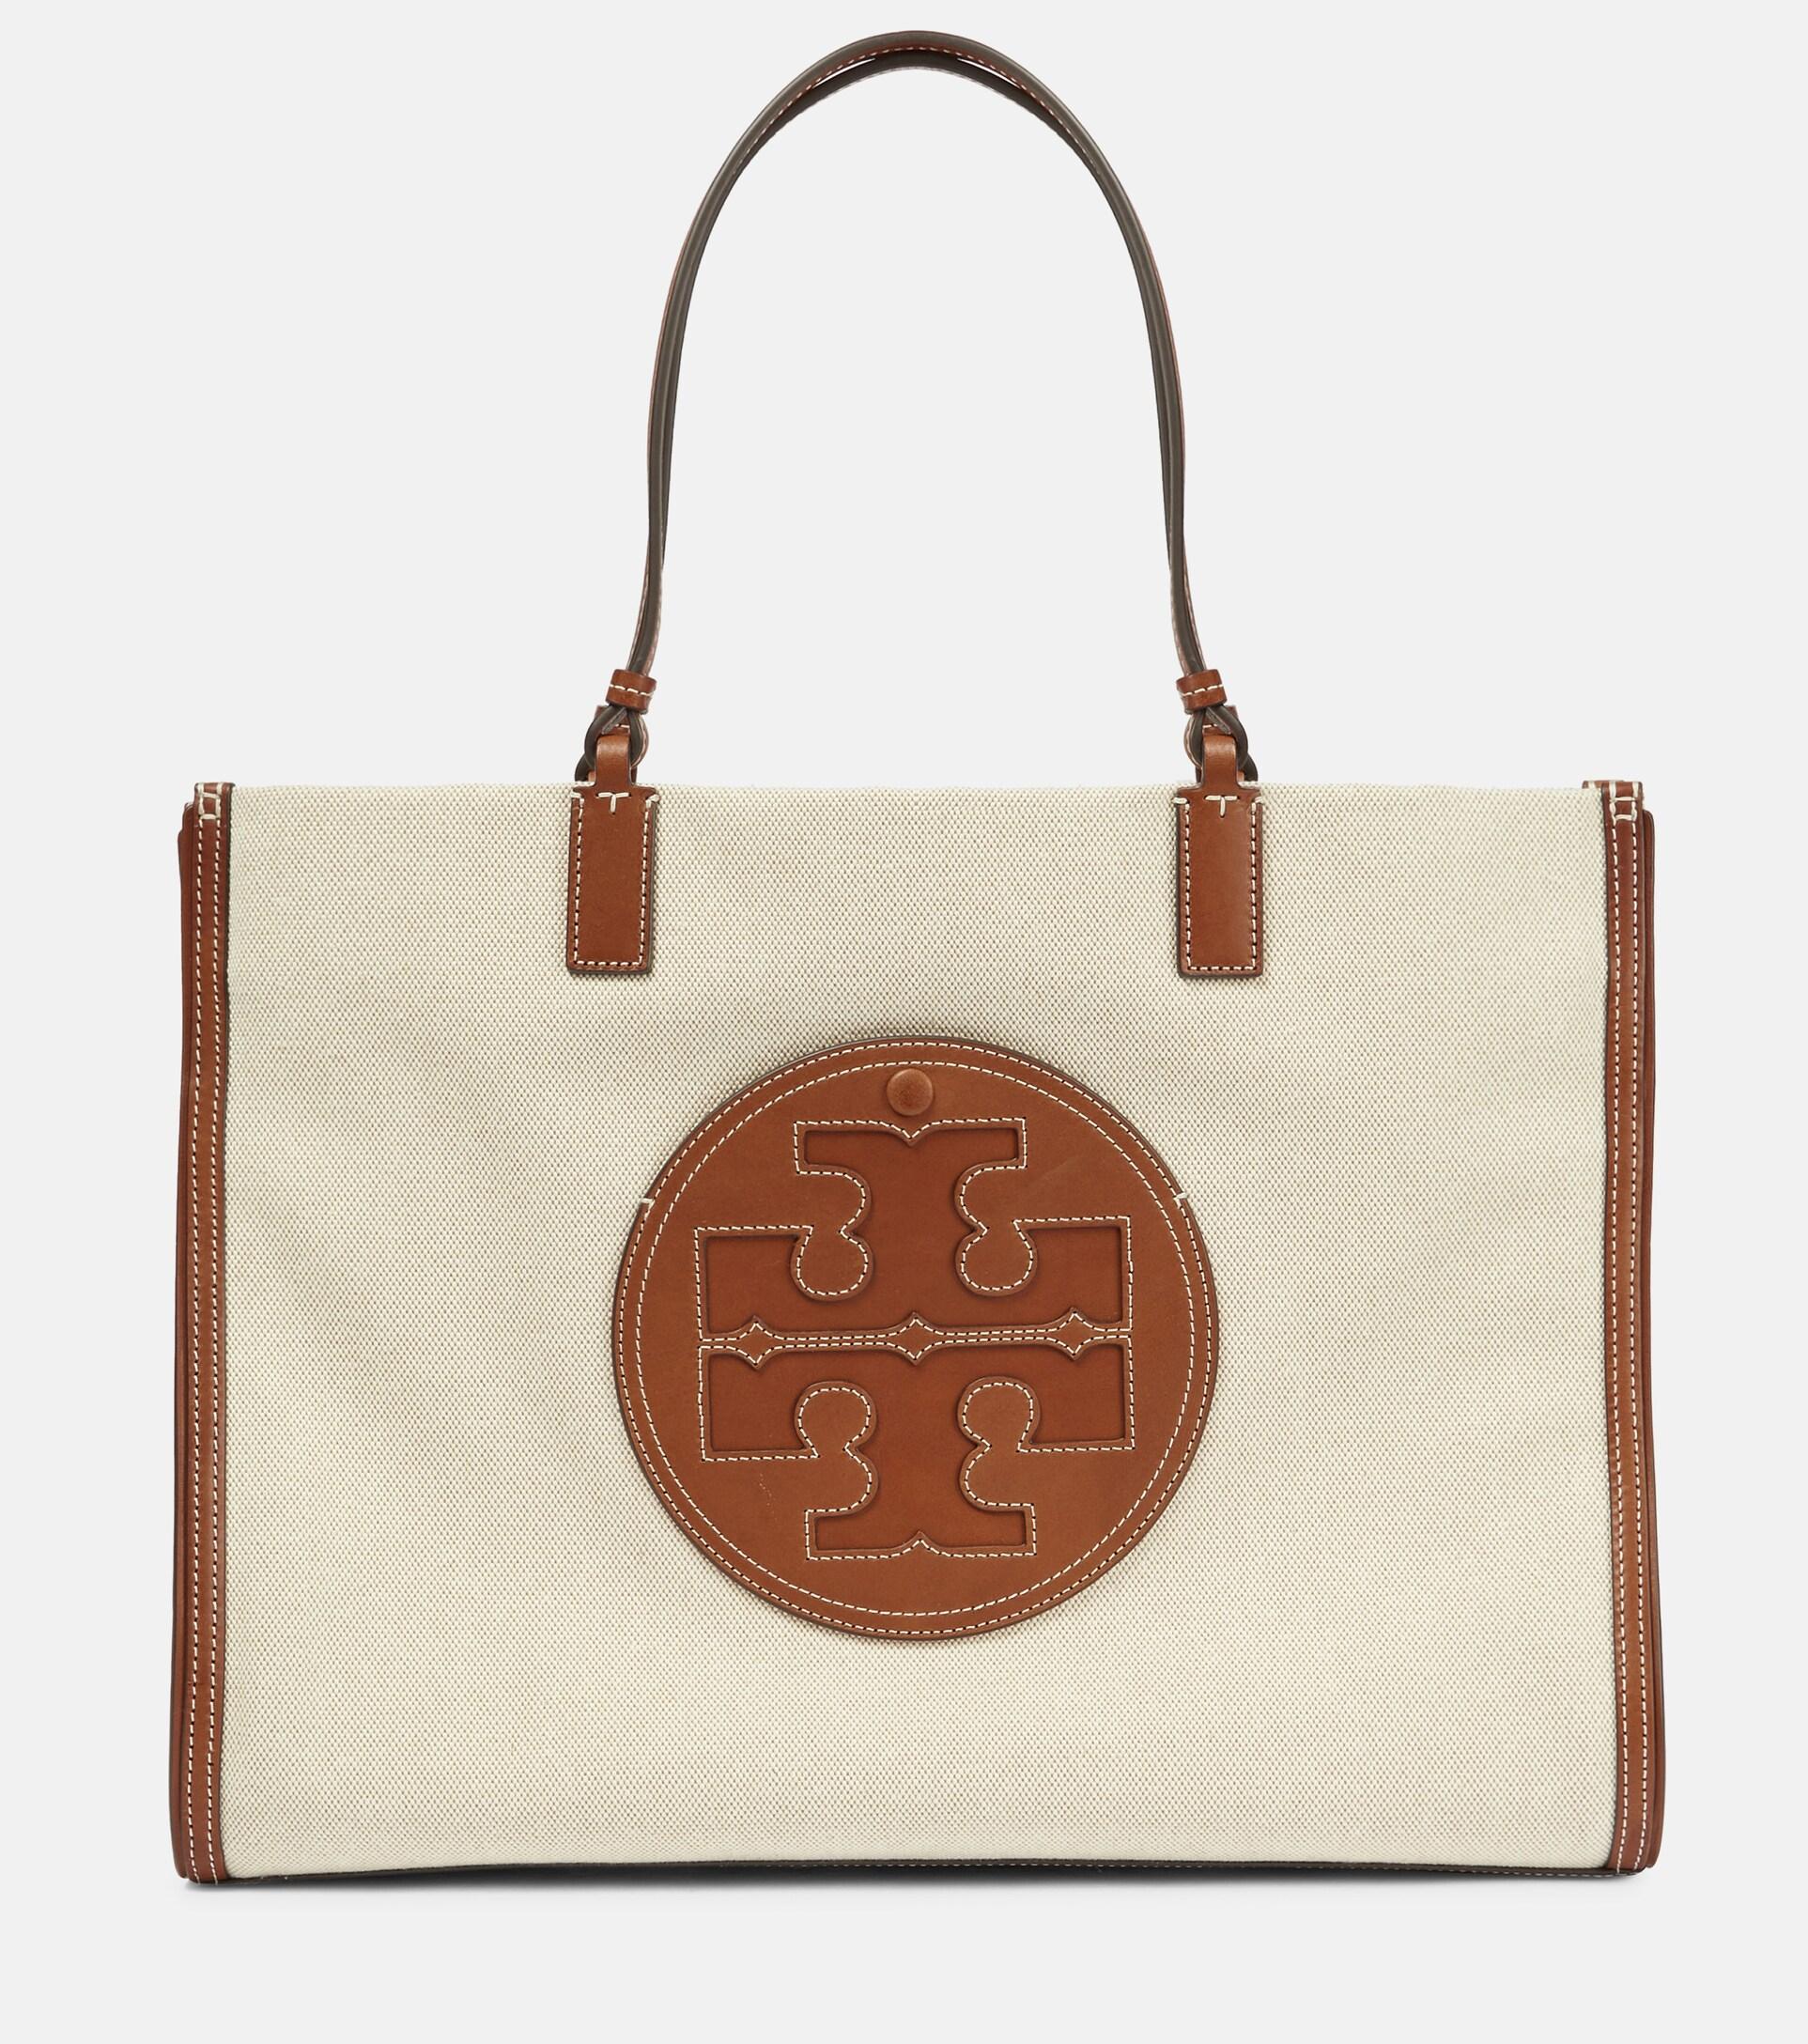 This Tory Burch Tote is Perfect for Spring